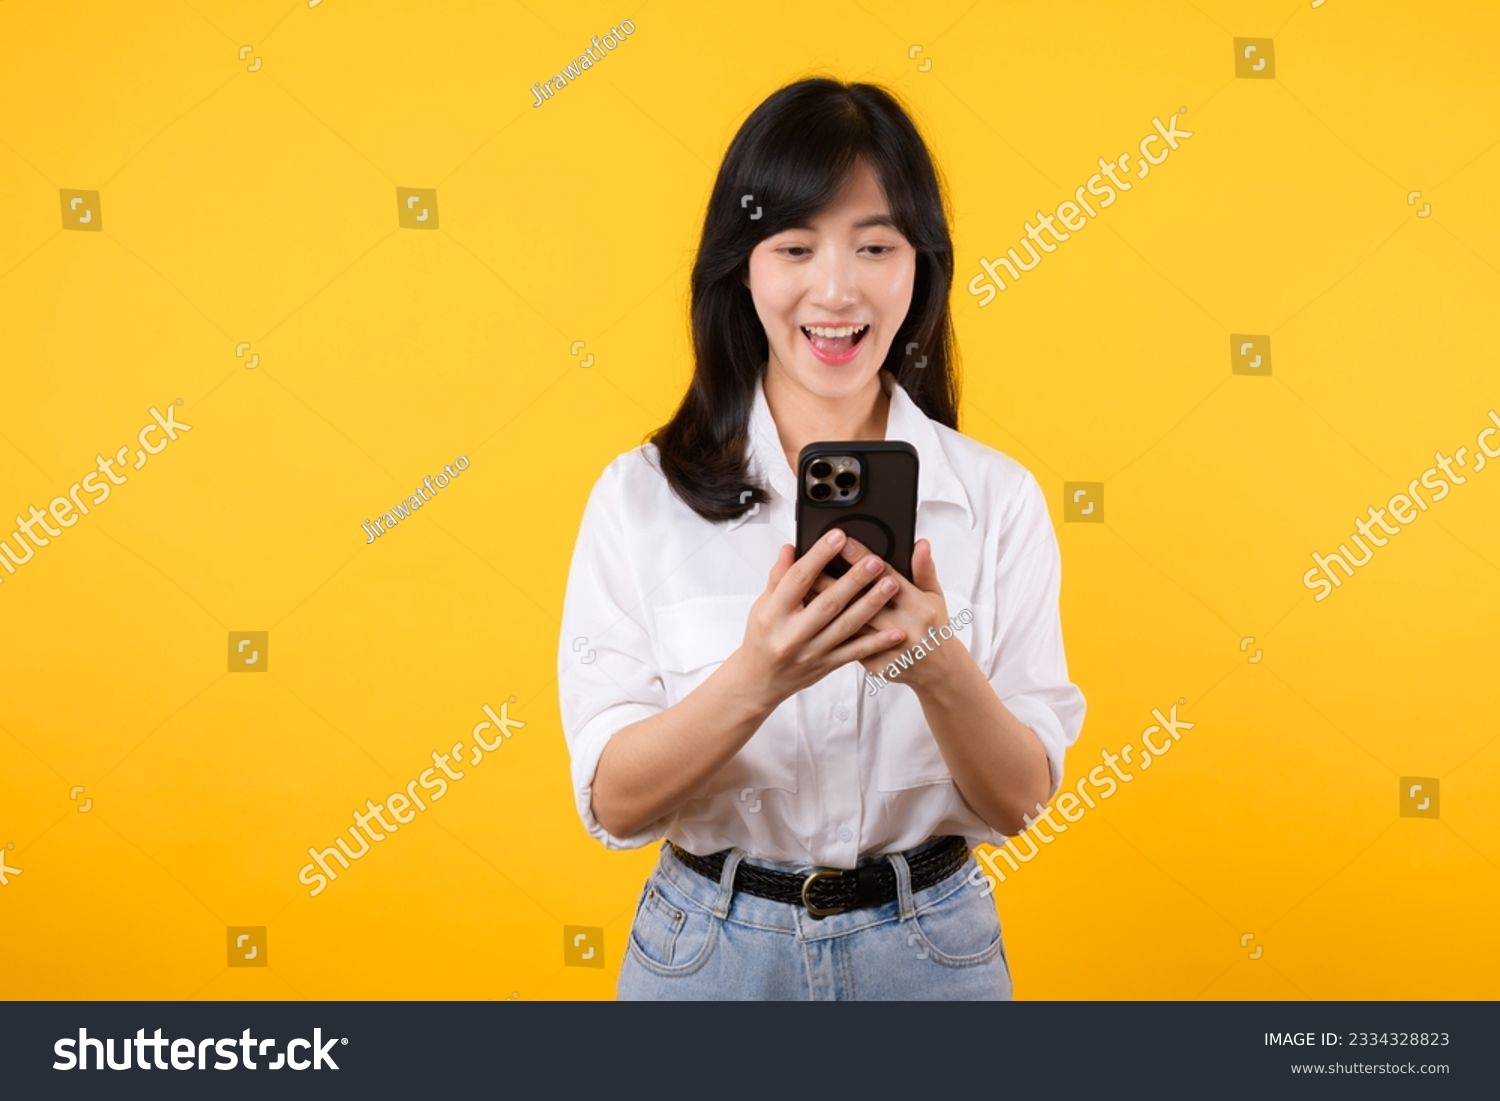 Surprised asian young woman using mobile phone with positive expression, smiles broadly, dressed in white shirt and standing isolated on yellow background. Happy adorable glad woman rejoices success. #2334328823